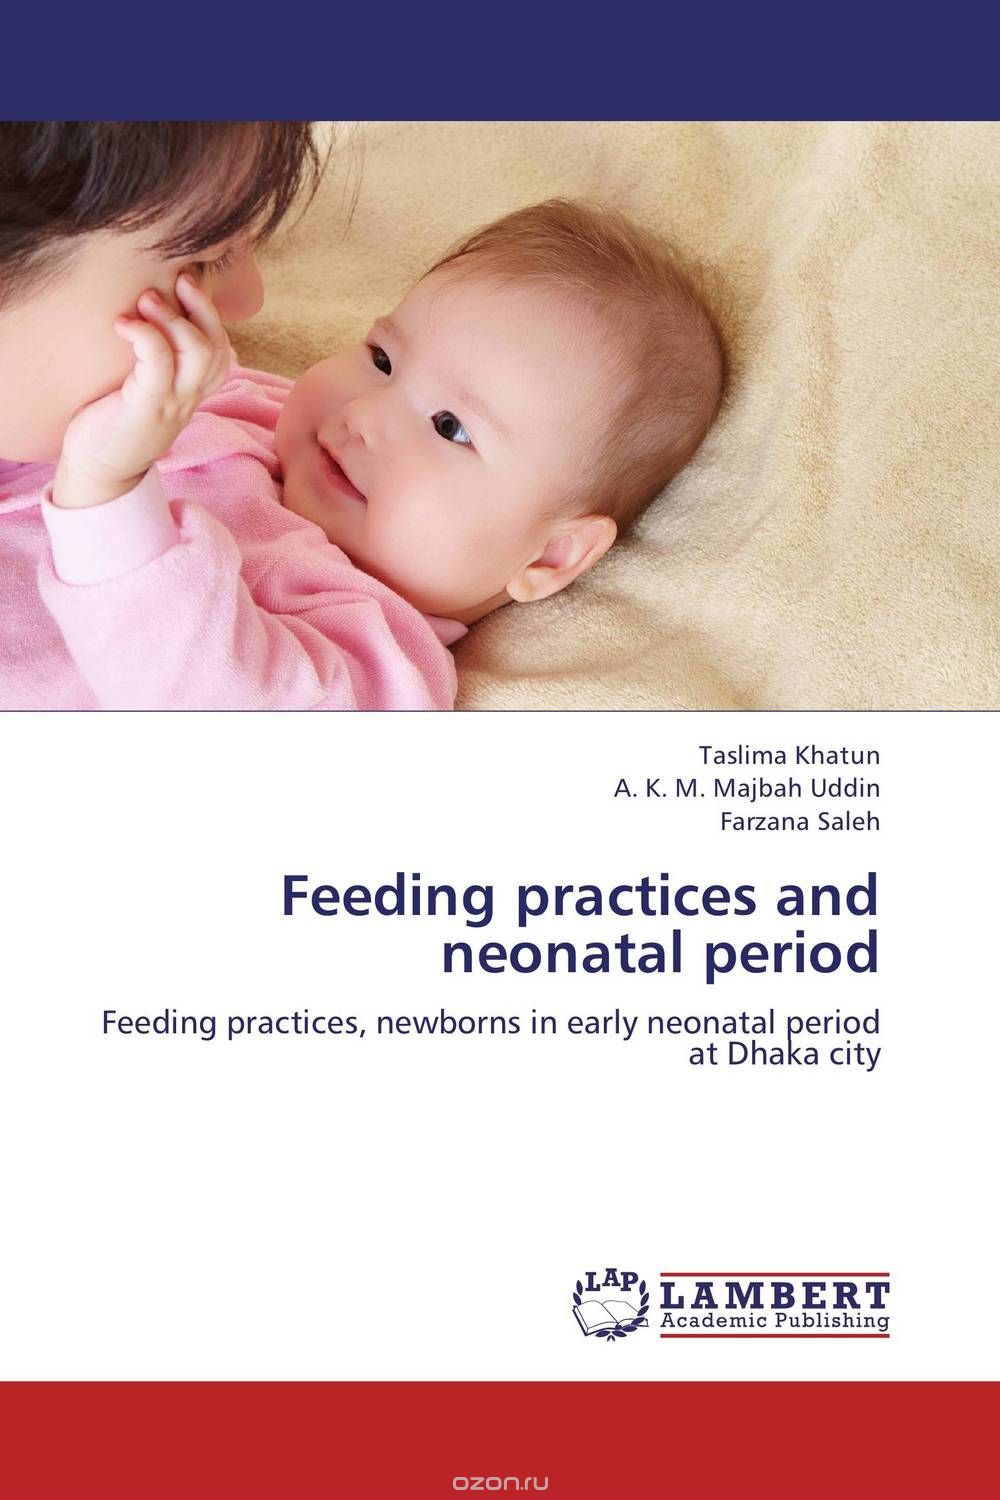 Feeding practices and neonatal period